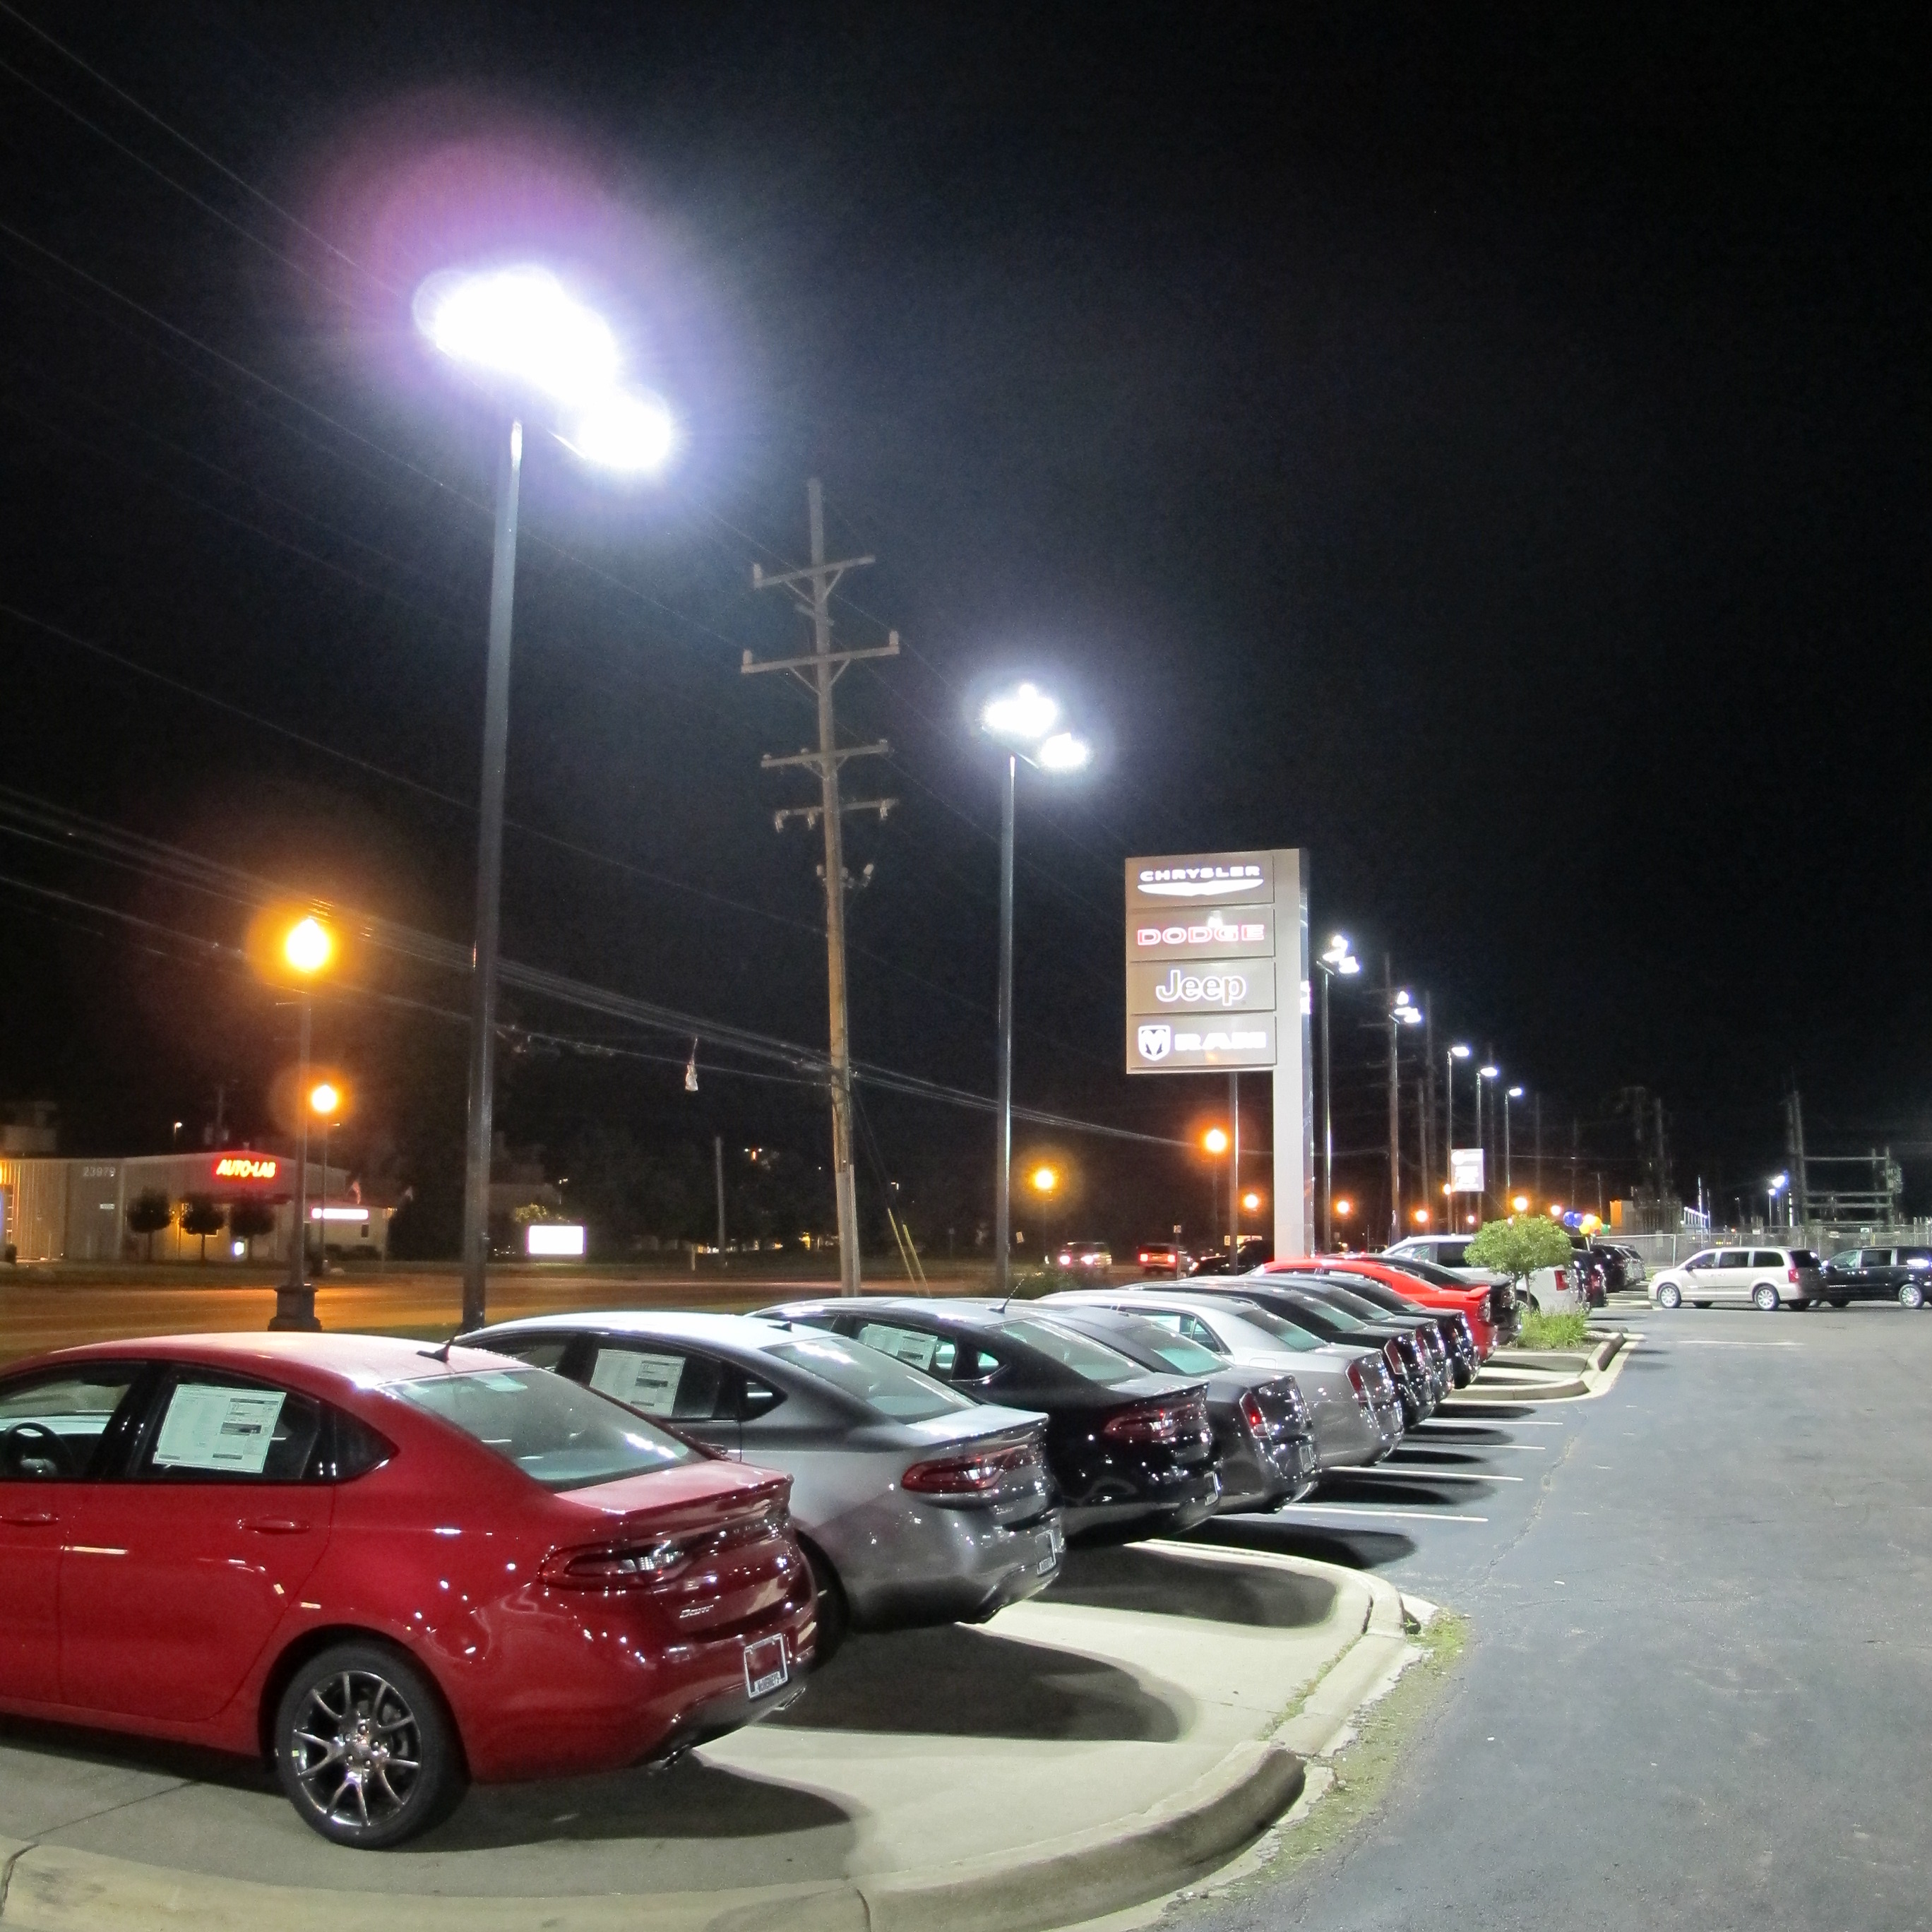 McInerneys Car Dealership Lot Lighting pictured with row of cars and pylon road sign